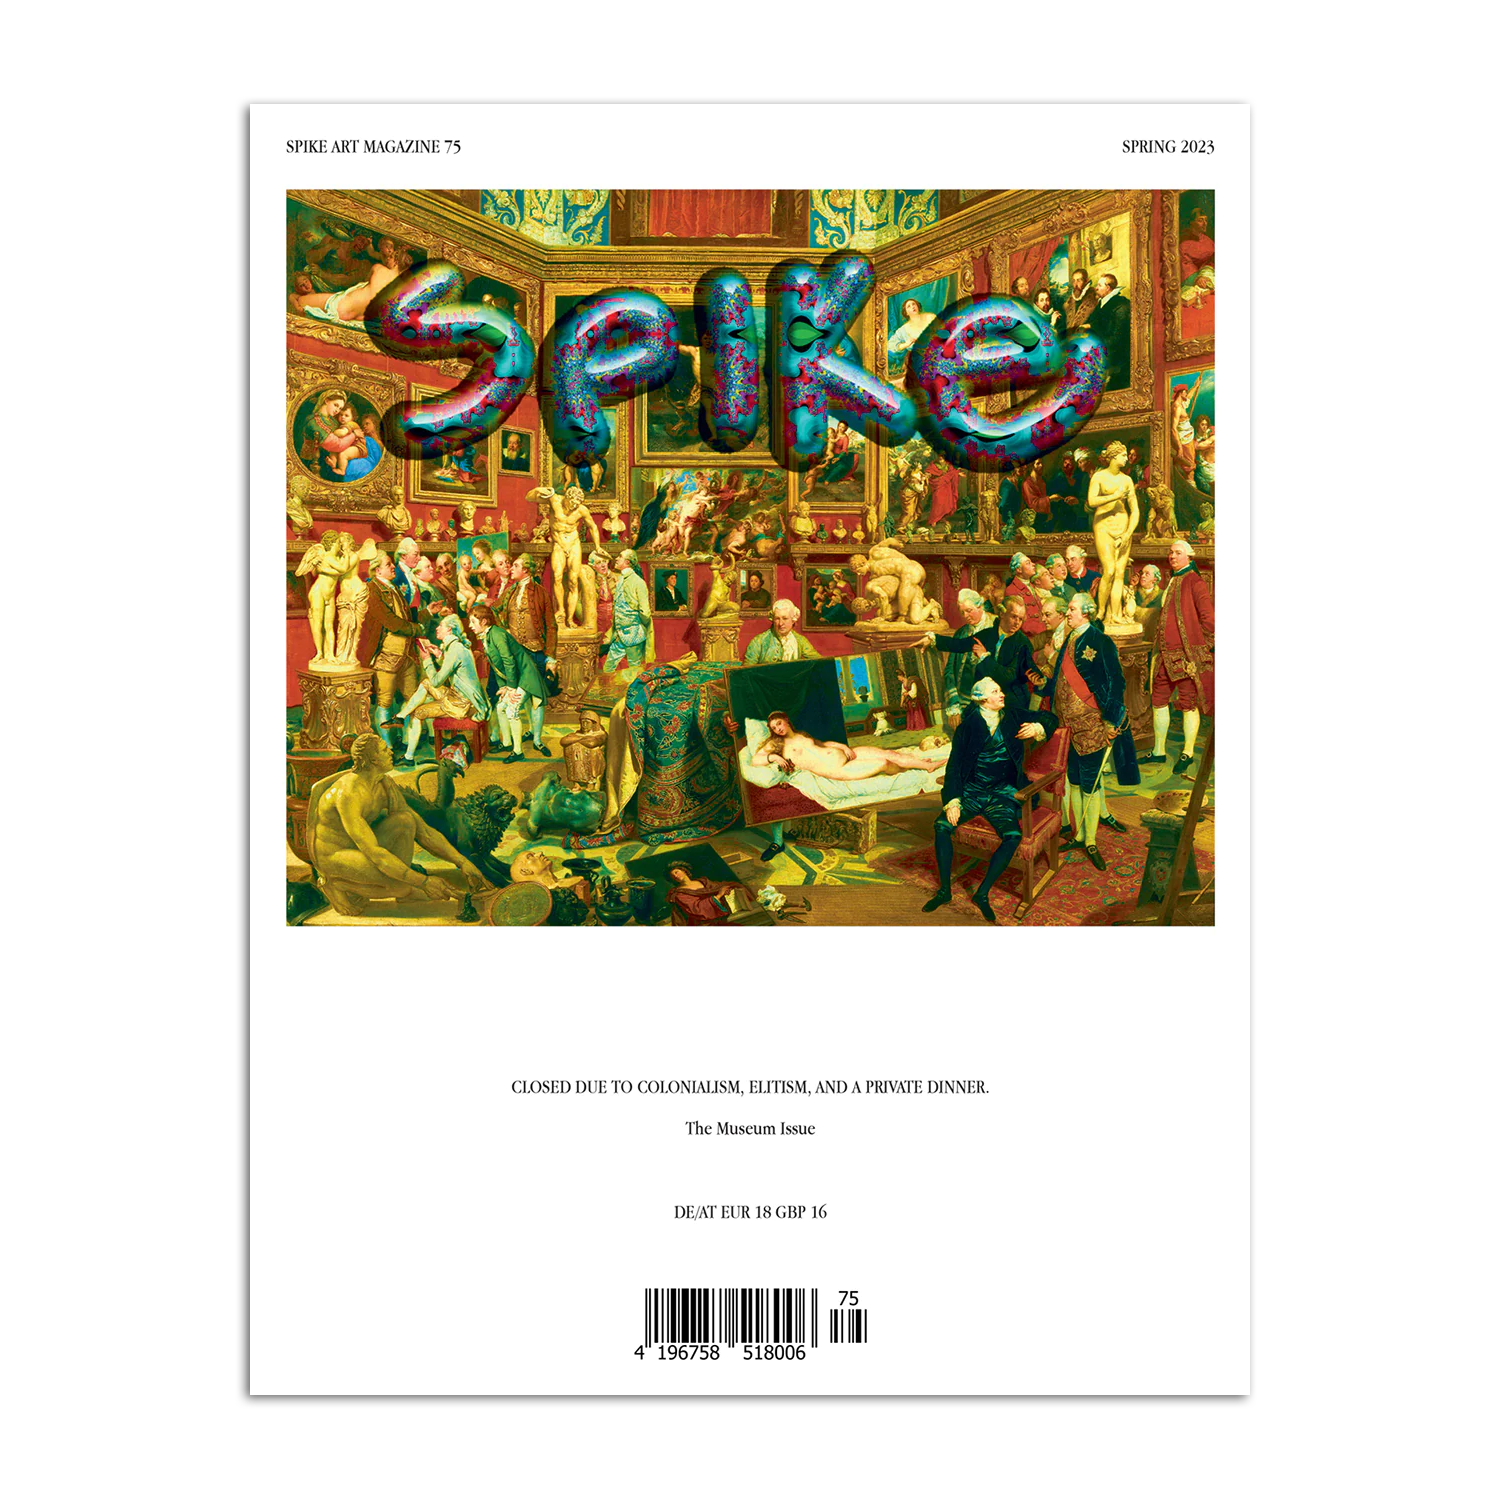 Spike Magazine - ISSUE 75 (SPRING 2023): THE MUSEUM ISSUE